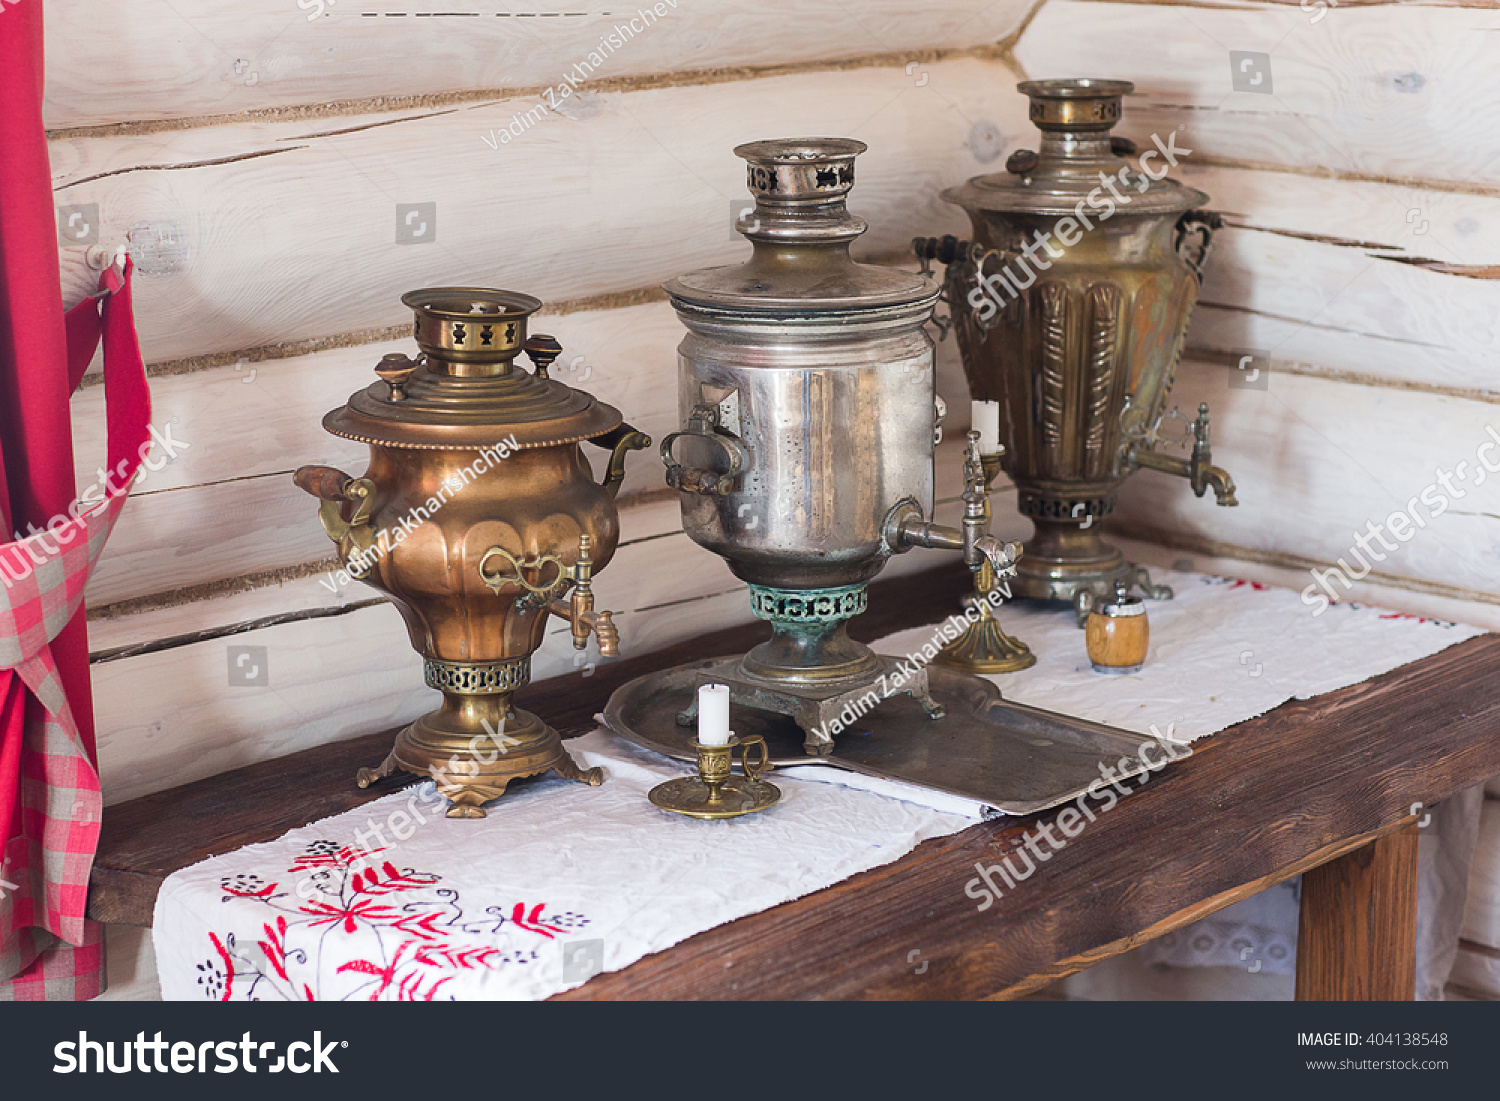 traditional old Russian tea kettle with bagels and marmalades #404138548